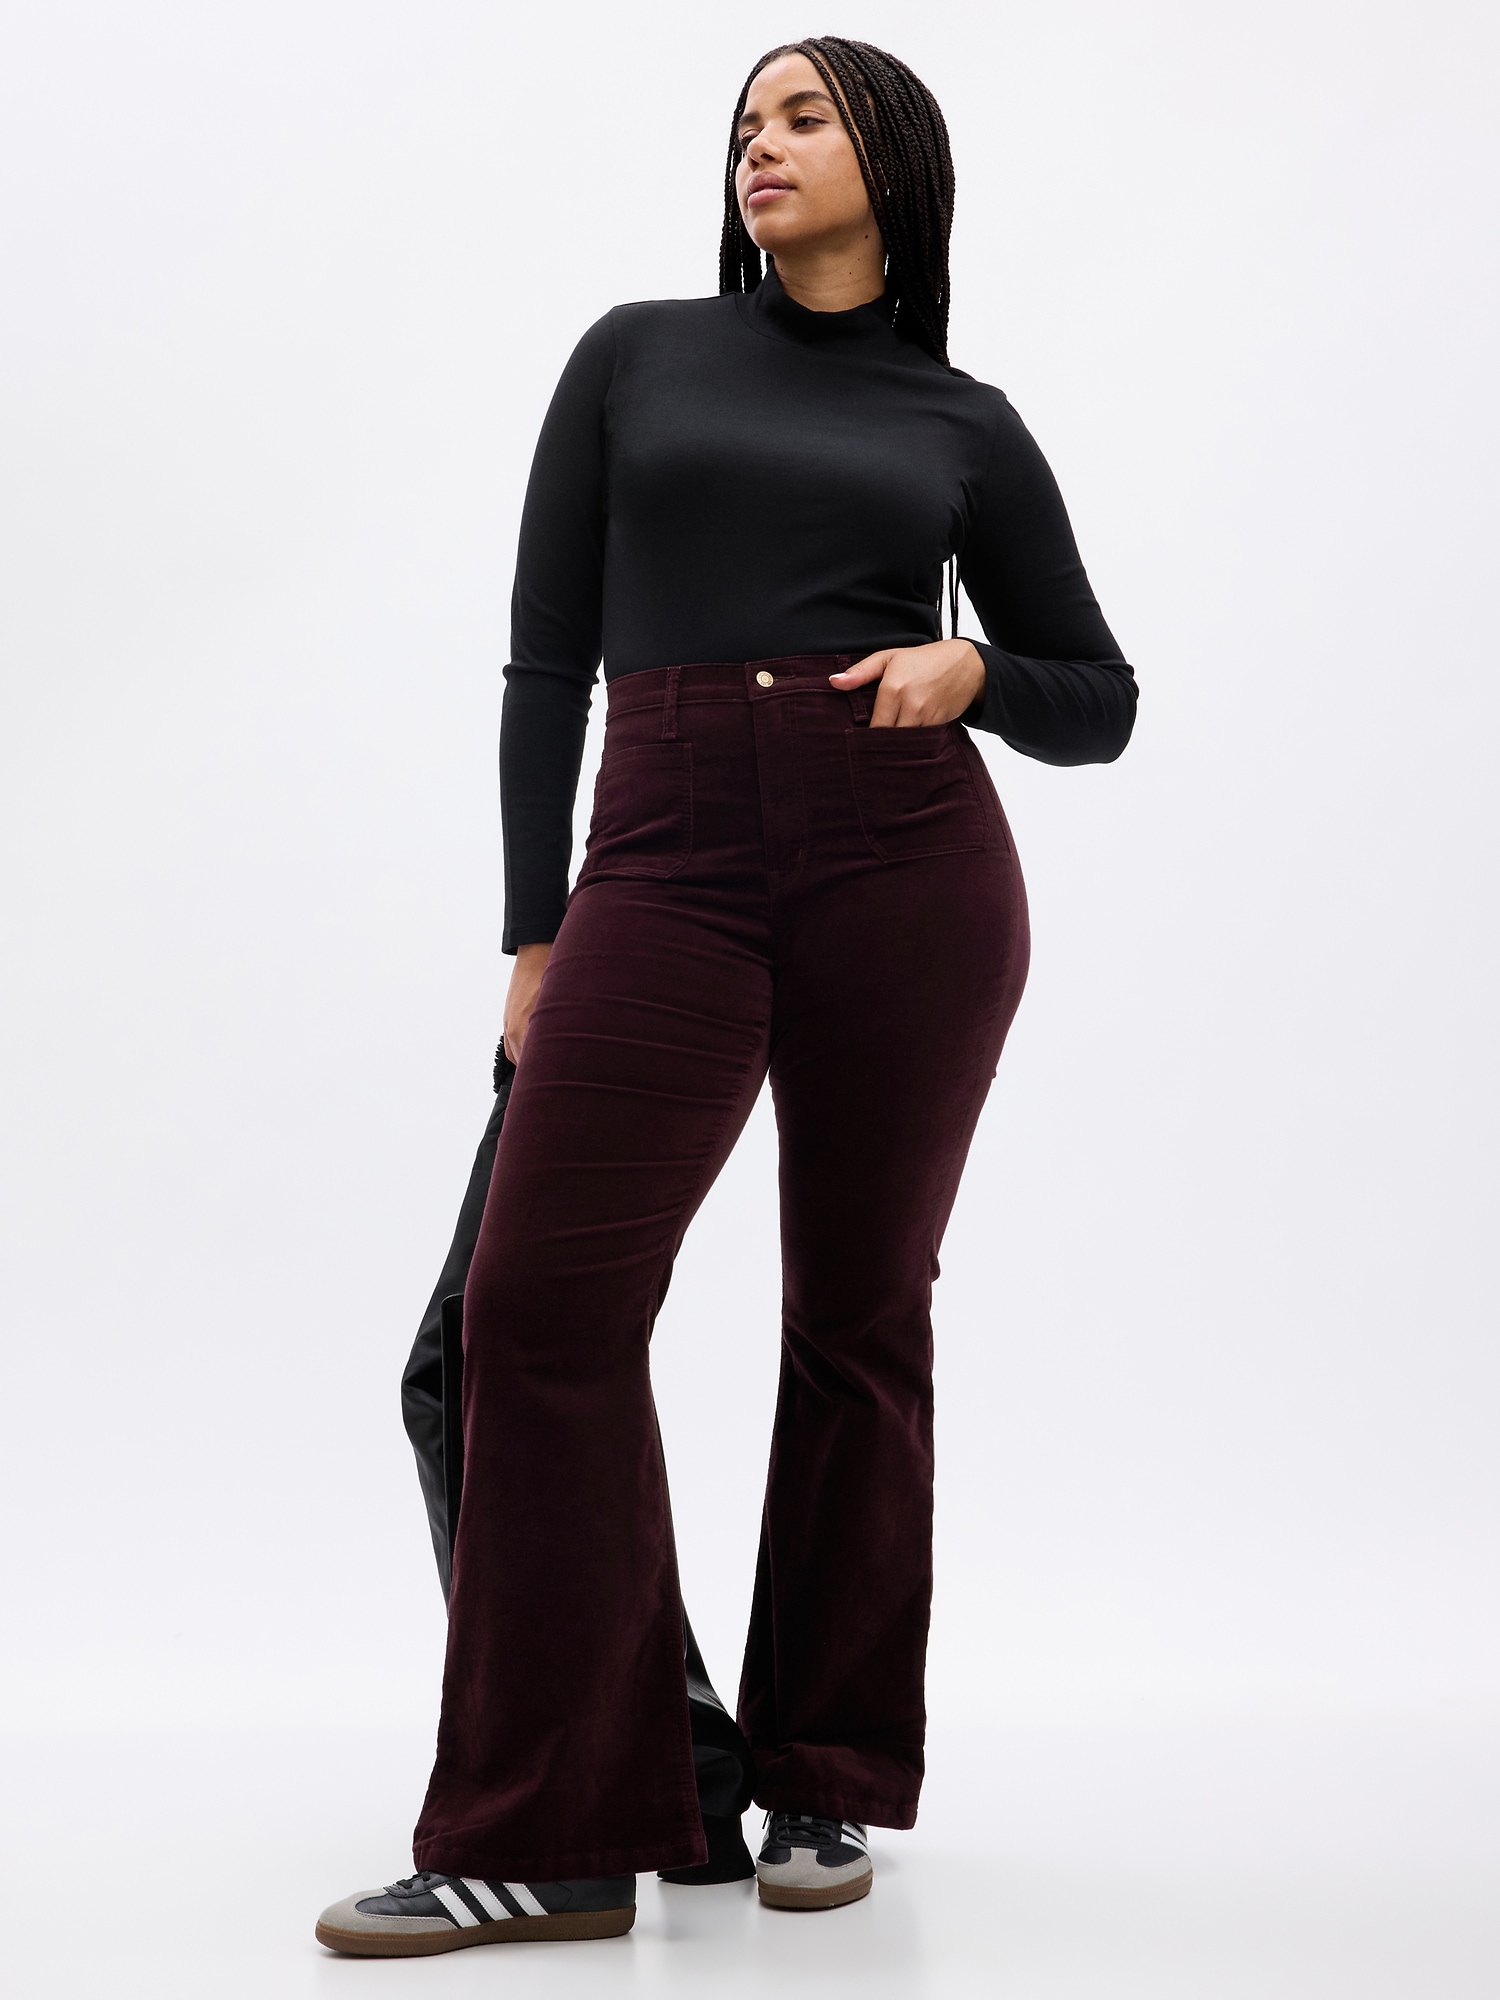 Purple Bell Bottoms Pants for Women, Flared Pants Women, High Waist  Trousers, High Rise Pants for Women, Burgundy Flared Pants Women's -   Canada